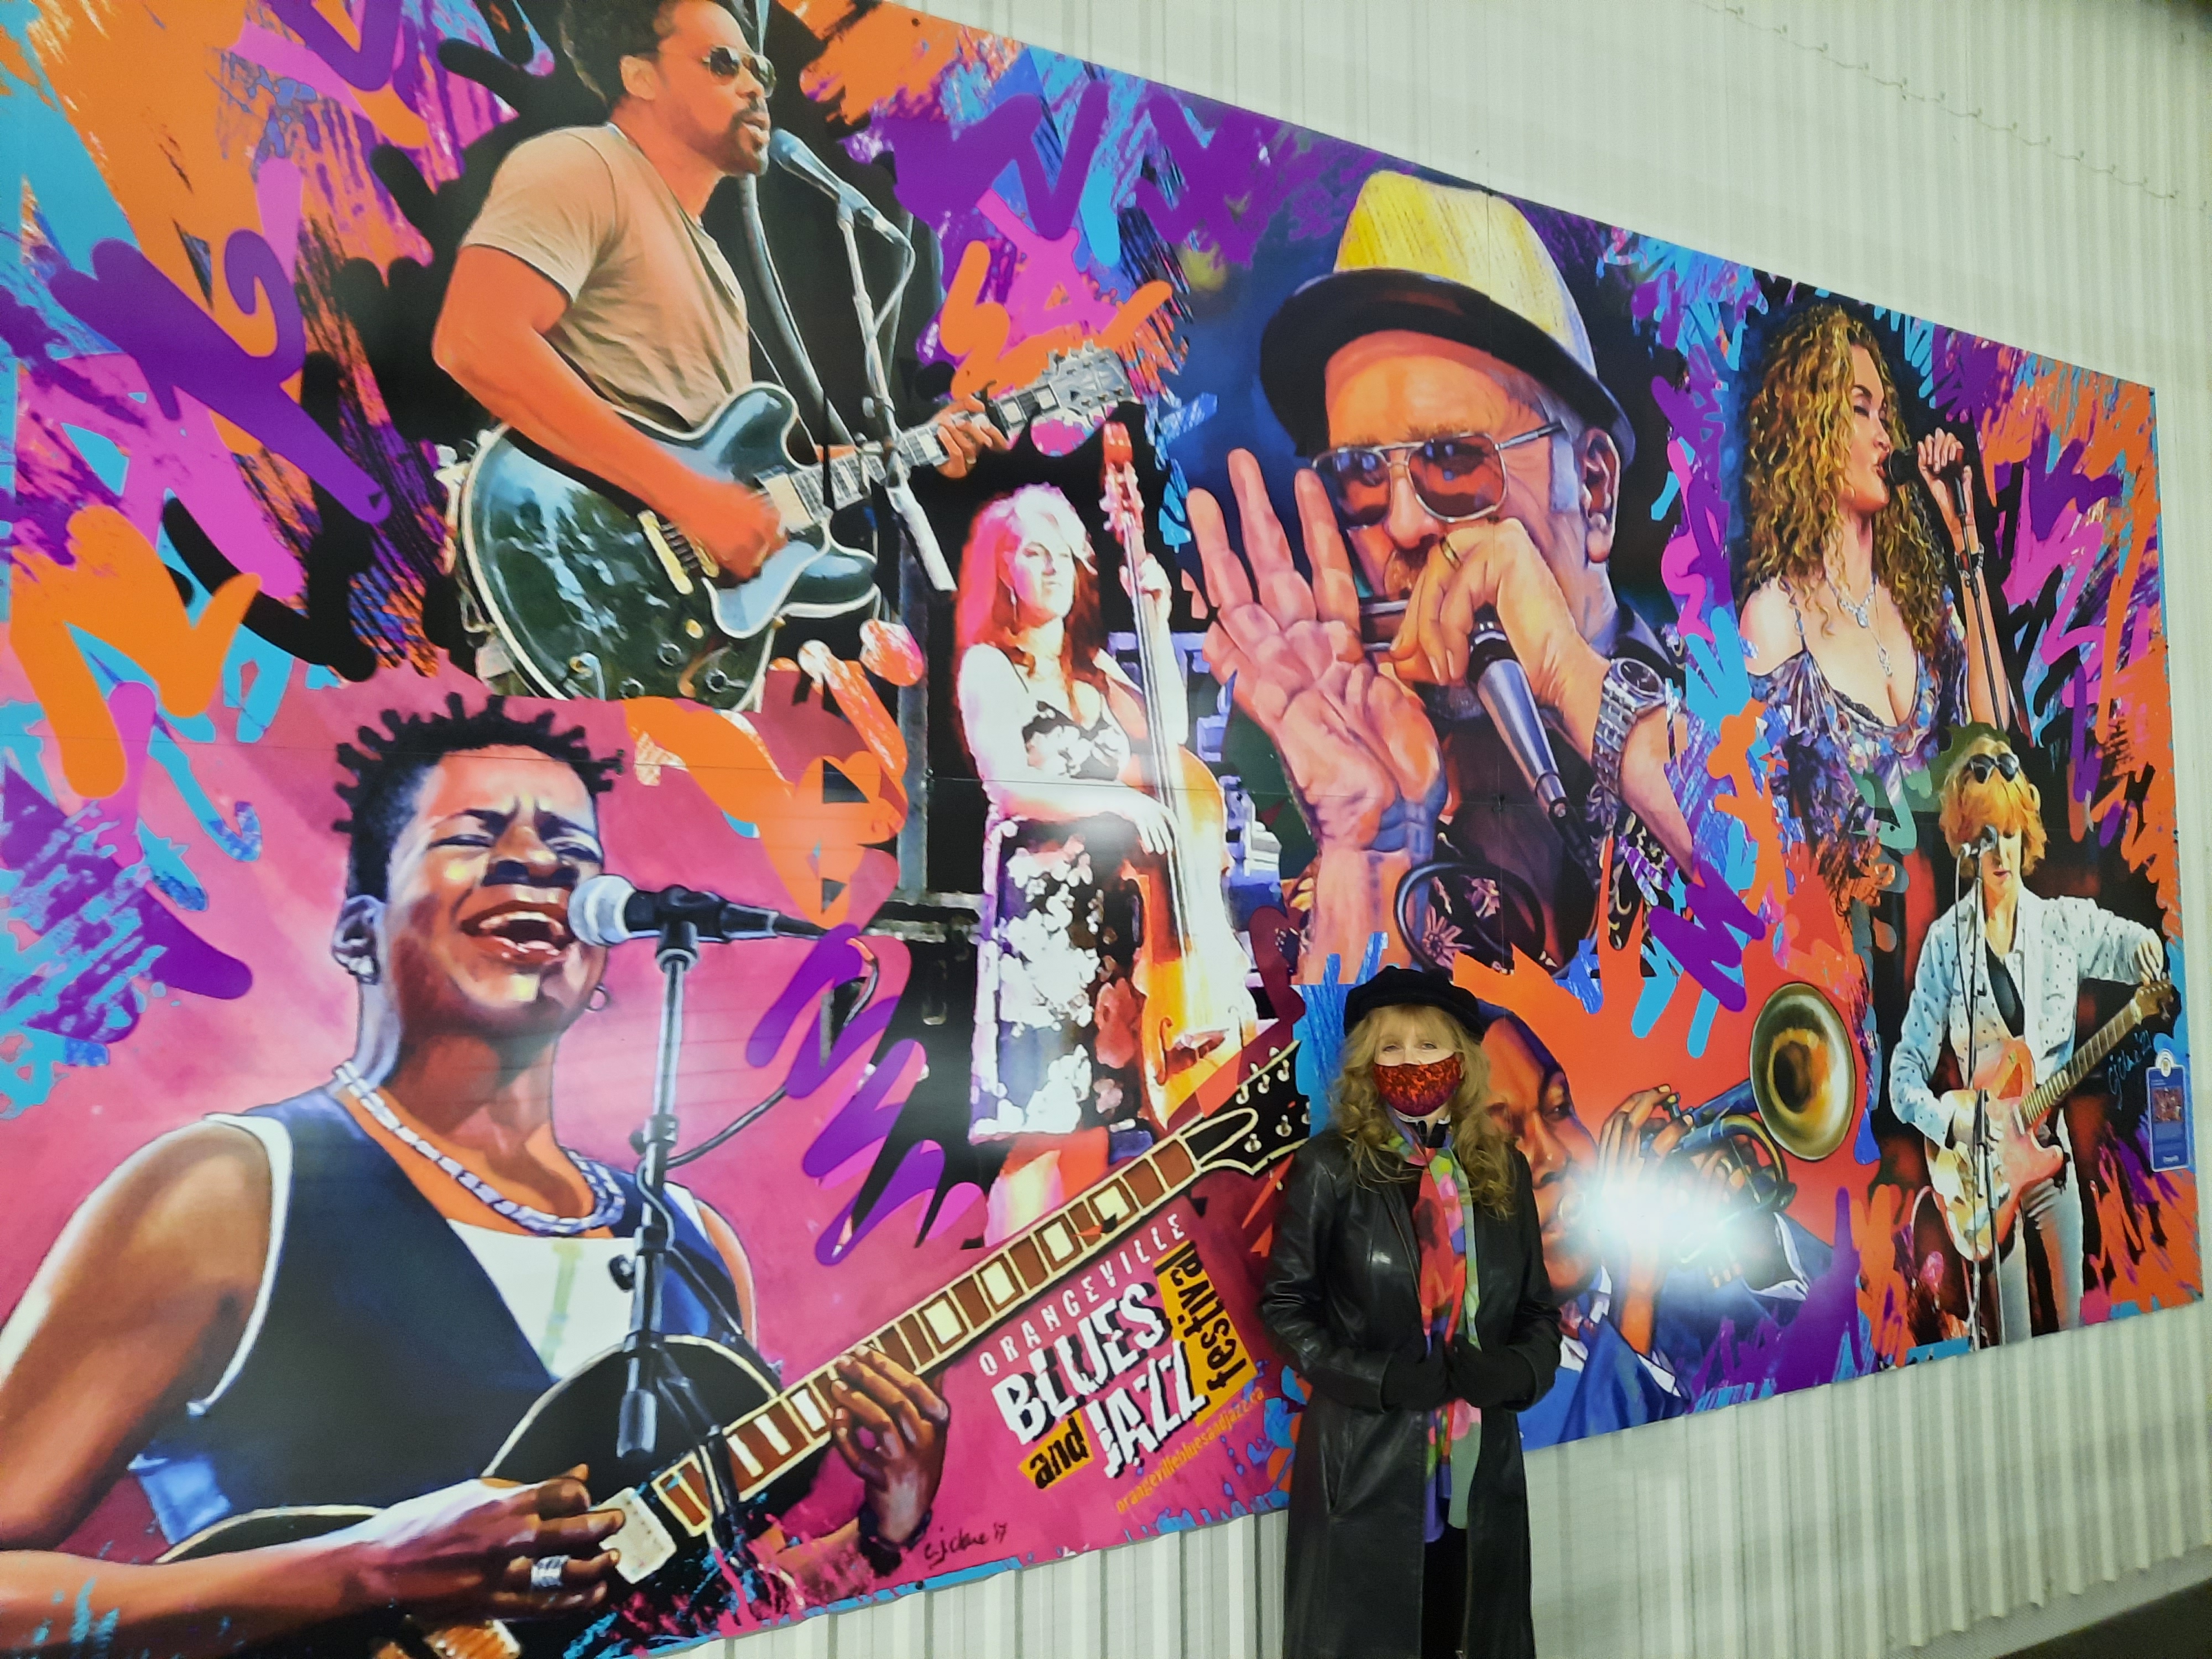 Christina Clare with her painting of multiple music artists